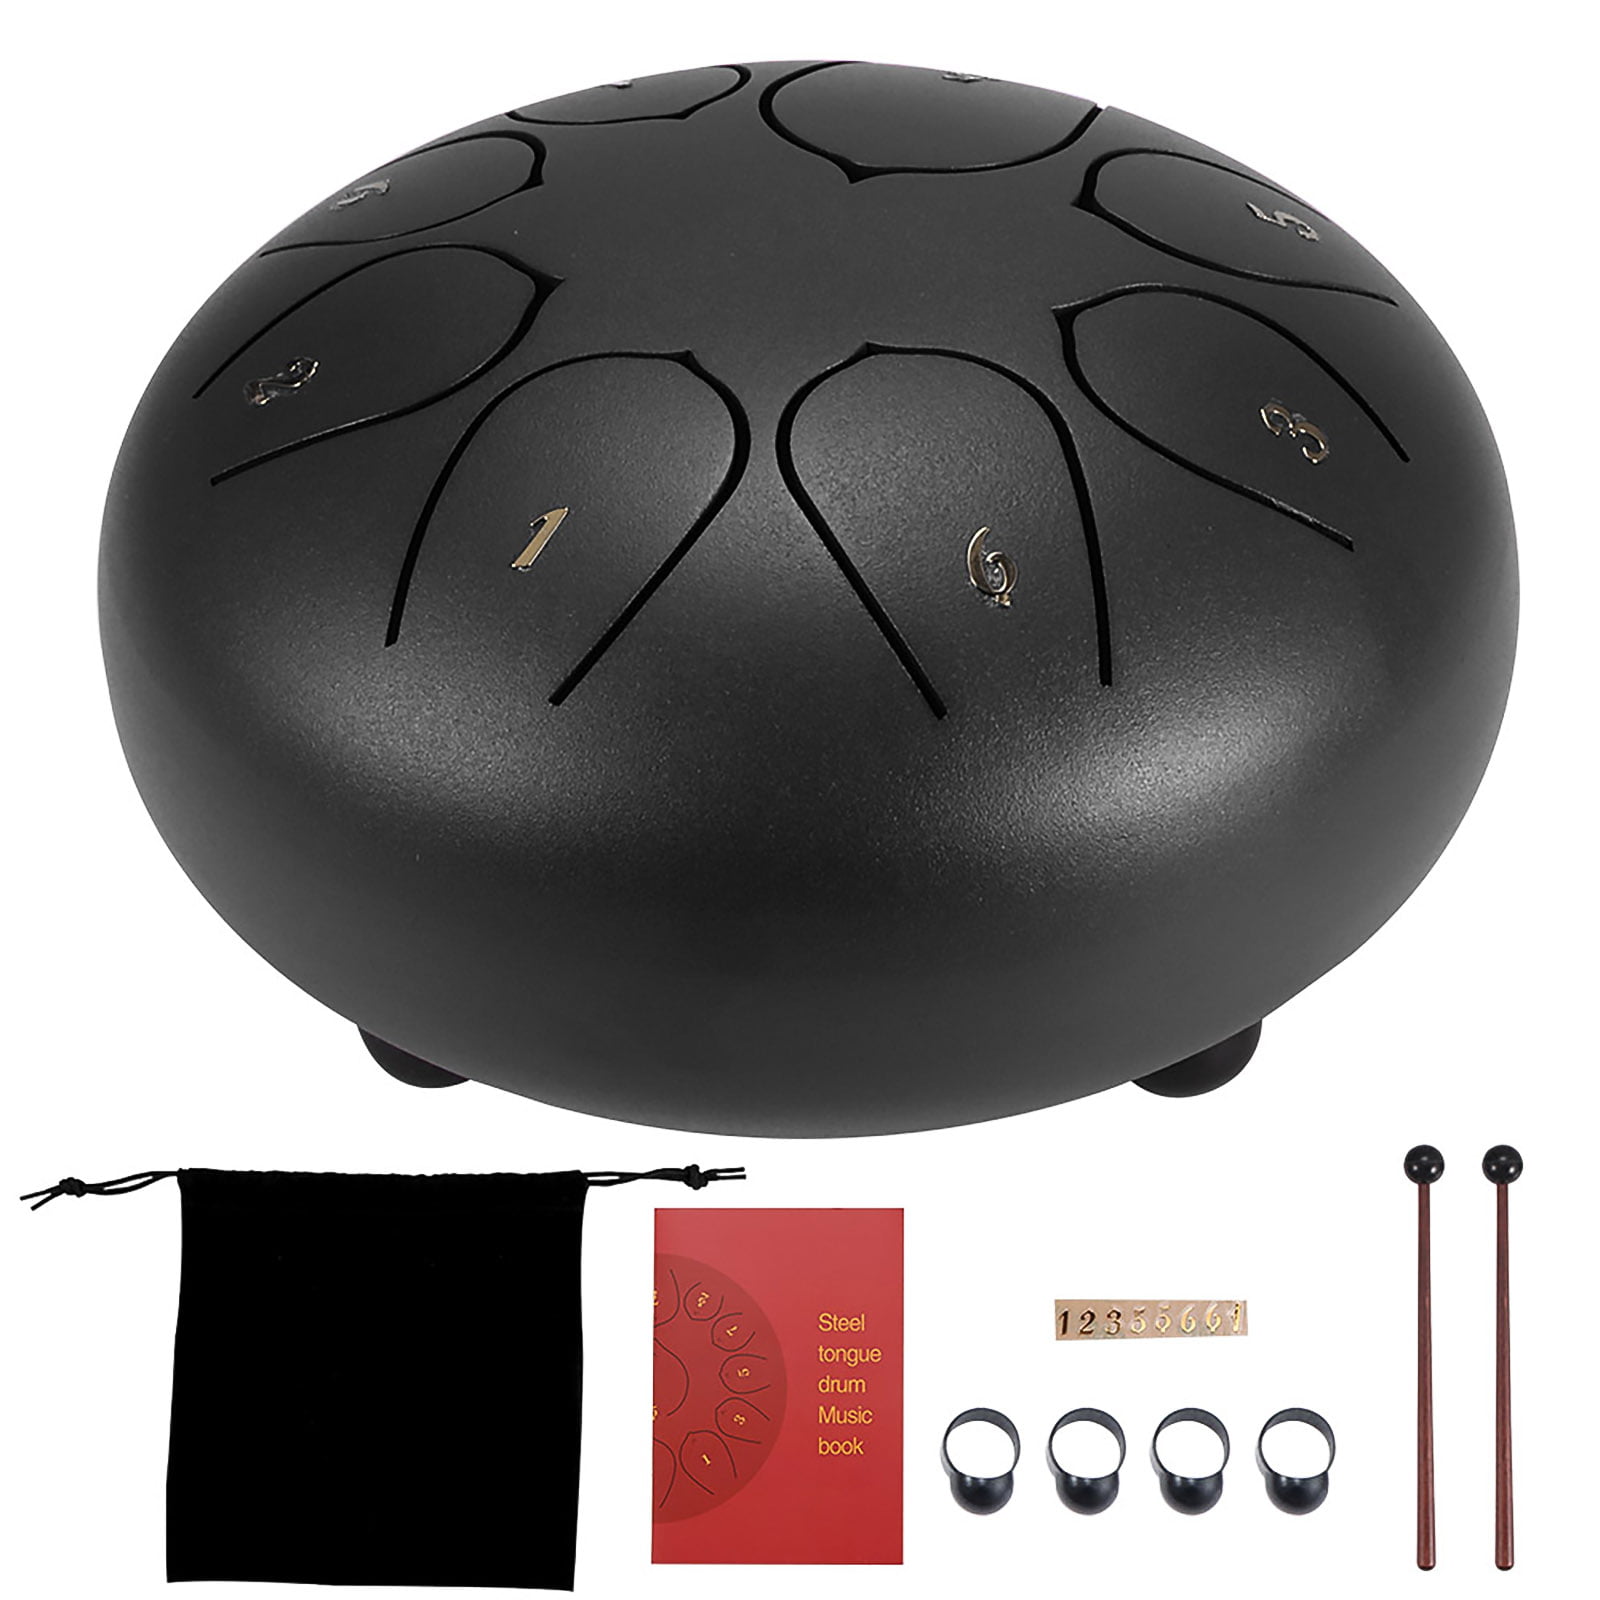 Muslady 12 Inch Steel Tongue Drum Handpan Drum Hand Drum 8 Tones Percussion Instrument with Drum Mallets Carry Bag Note Sticks for Meditation Yoga Zazen Sound Healing